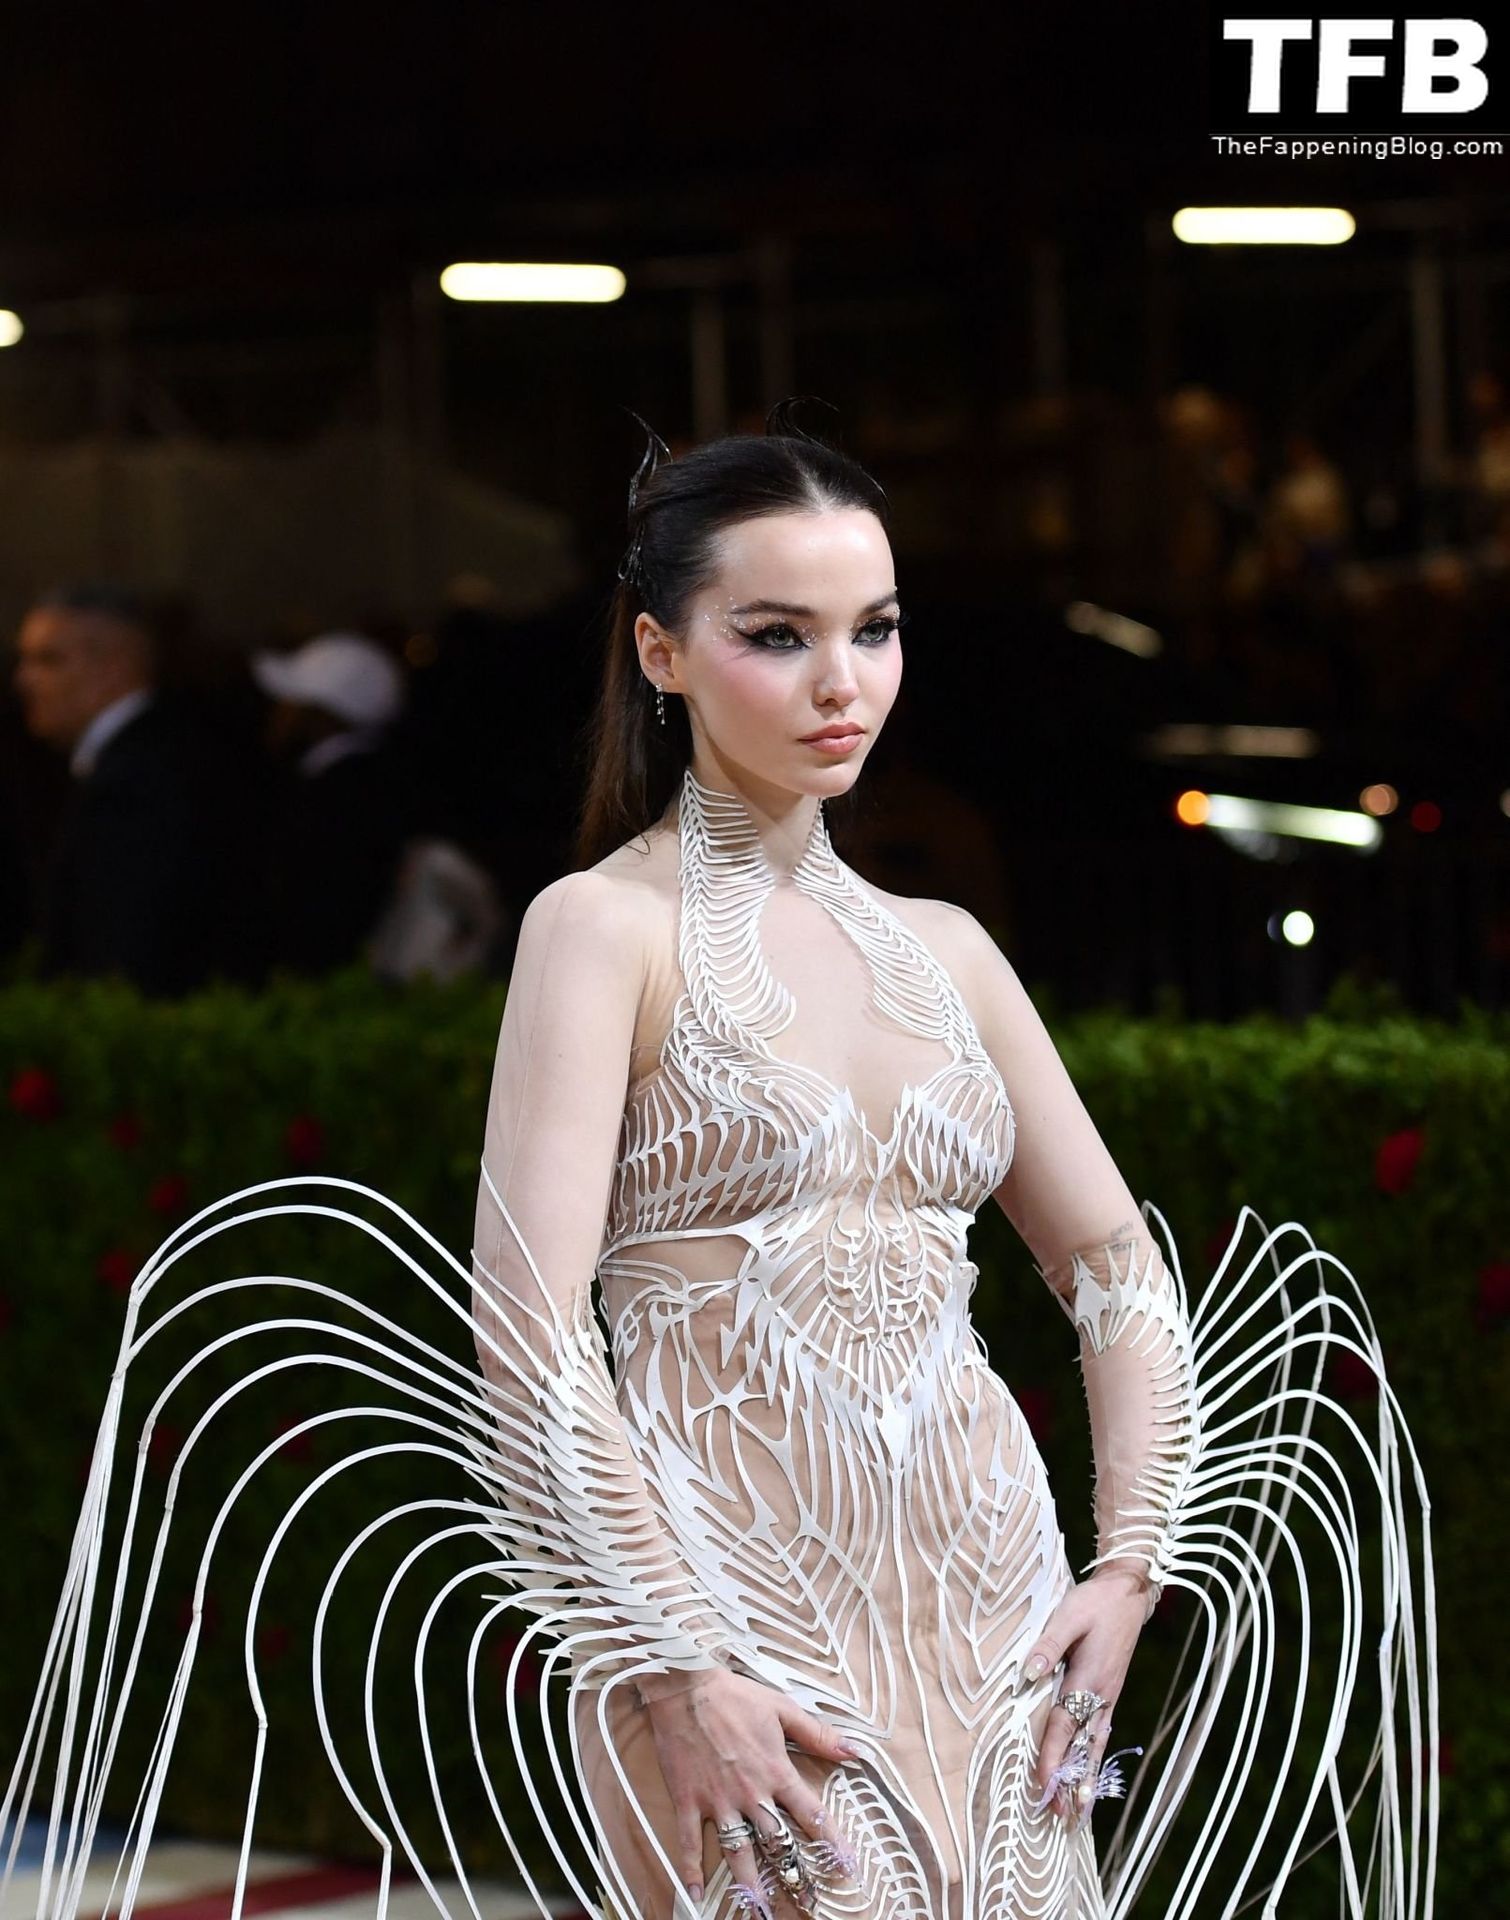 Dove-Cameron-See-Through-The-Fappening-Blog-16.jpg